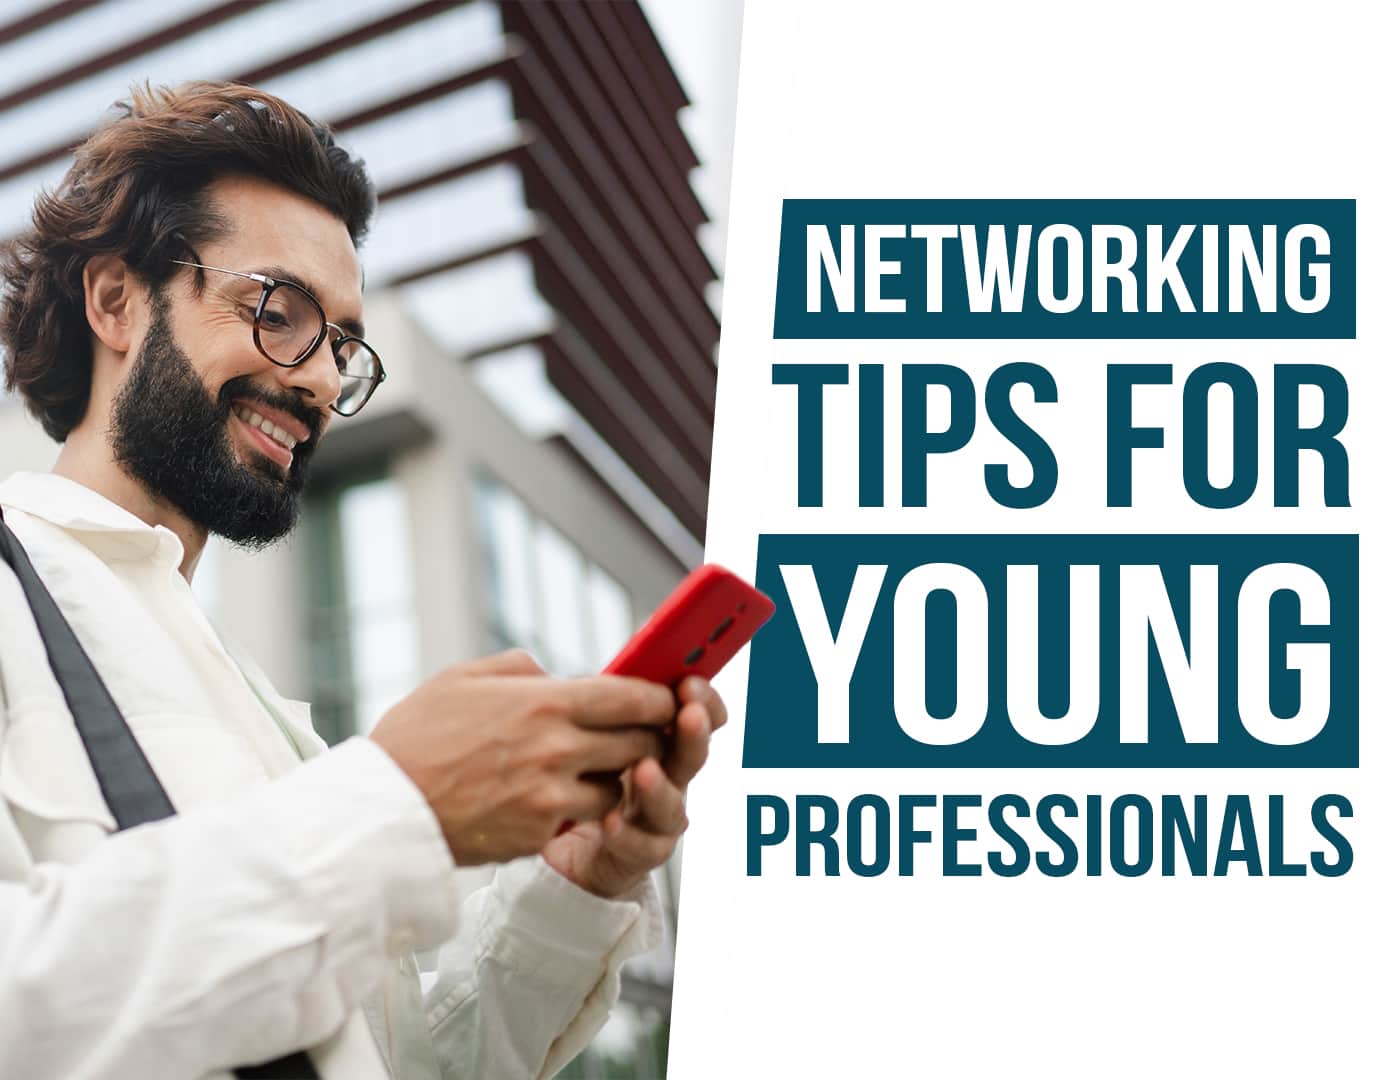 Networking tips for young professionals